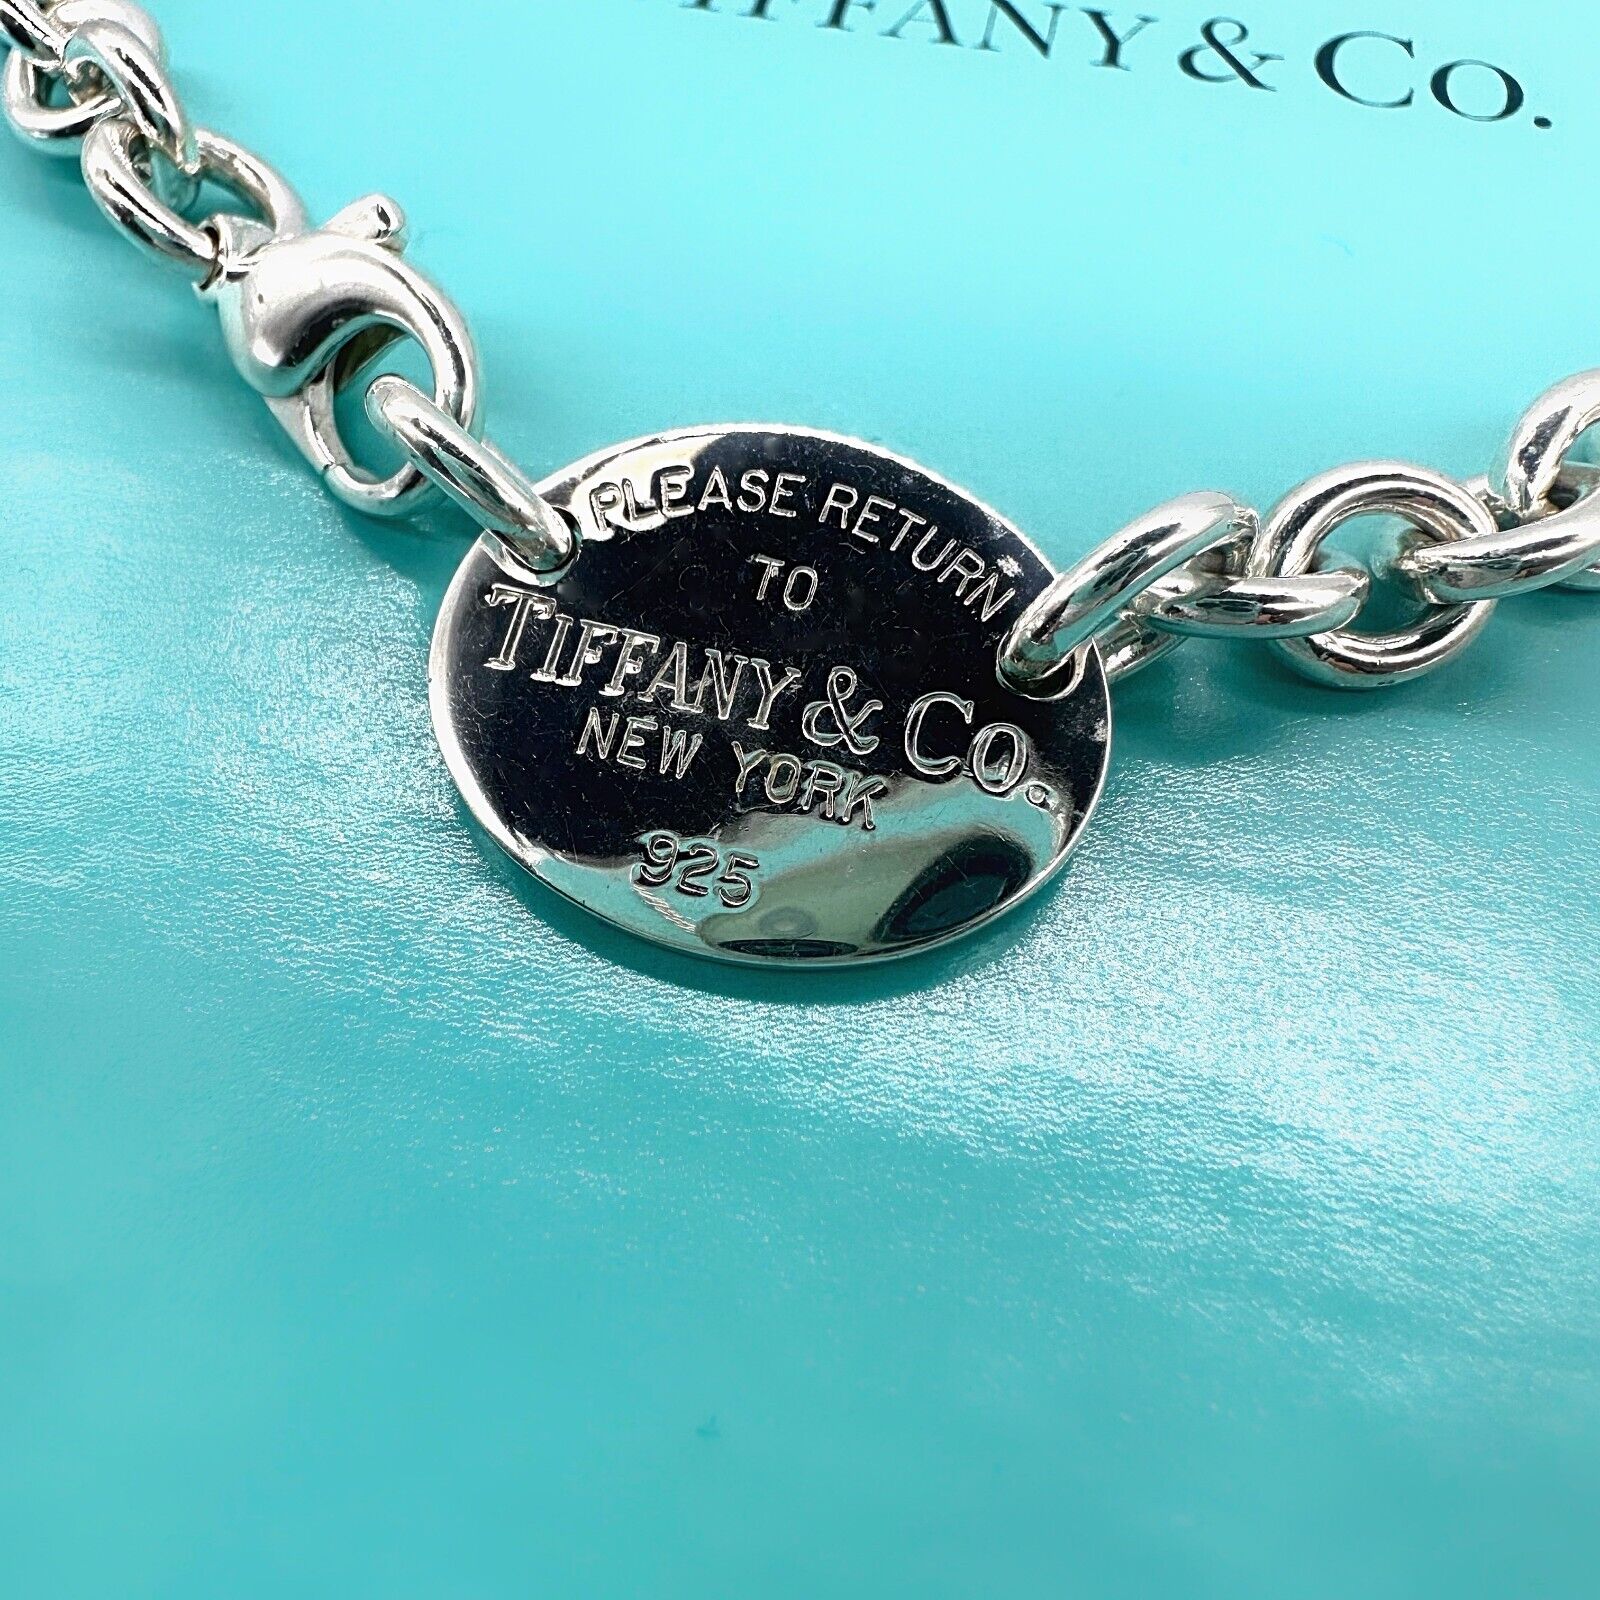 Authentic Tiffany & Co. Return To Tiffany Oval Link Necklace Choker 15.75”  Silver, Women's Fashion, Jewelry & Organisers, Necklaces on Carousell